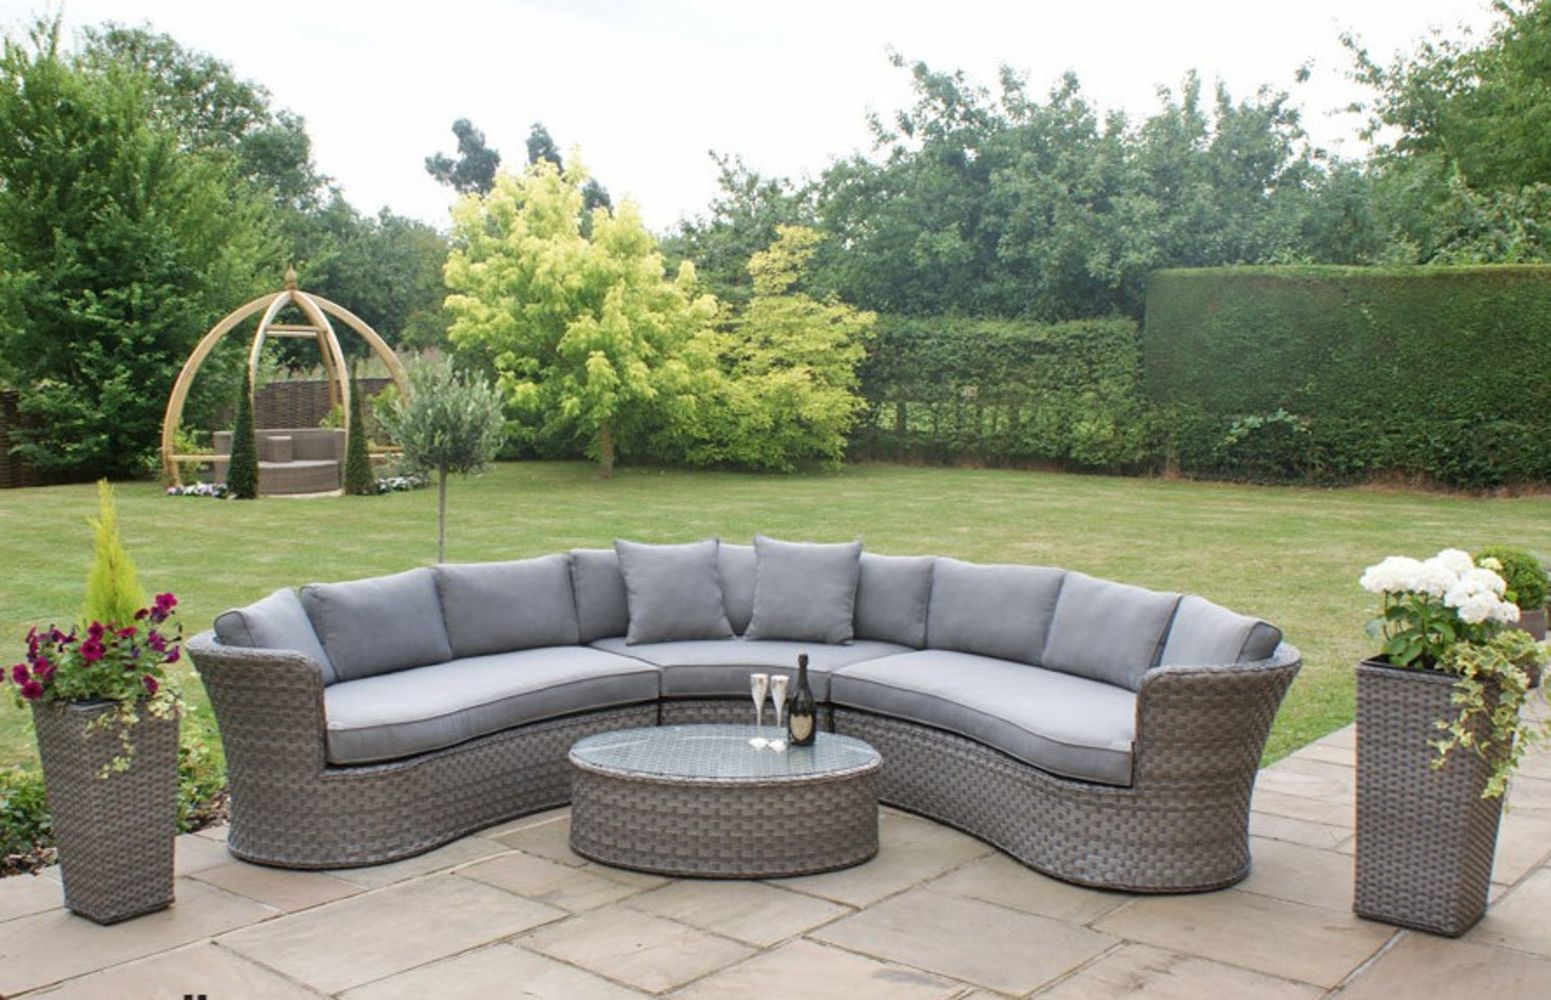 **New Lines Added** Brand New Rattan Garden Furniture: Including Dining Sets, Day Beds, Sofa Sets & Sun Loungers